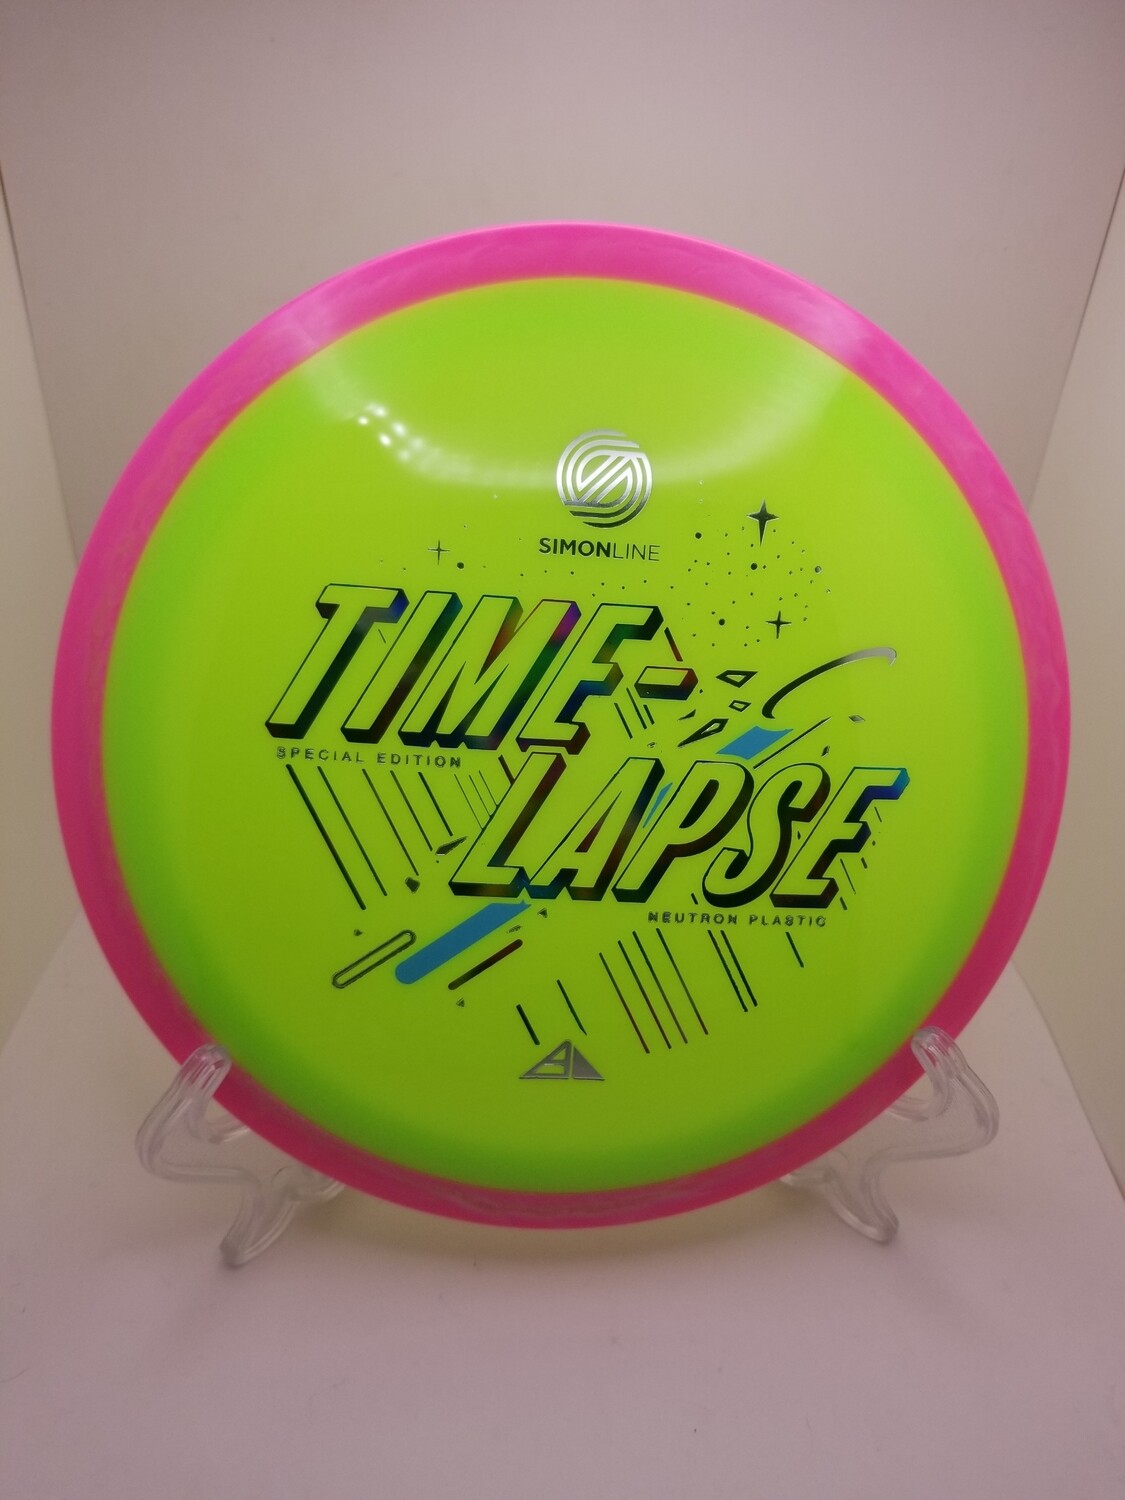 Axiom Discs Special Edition Time Lapse Dayglow Green and Swirly Pink Rim Neutron 175g. Simon Line